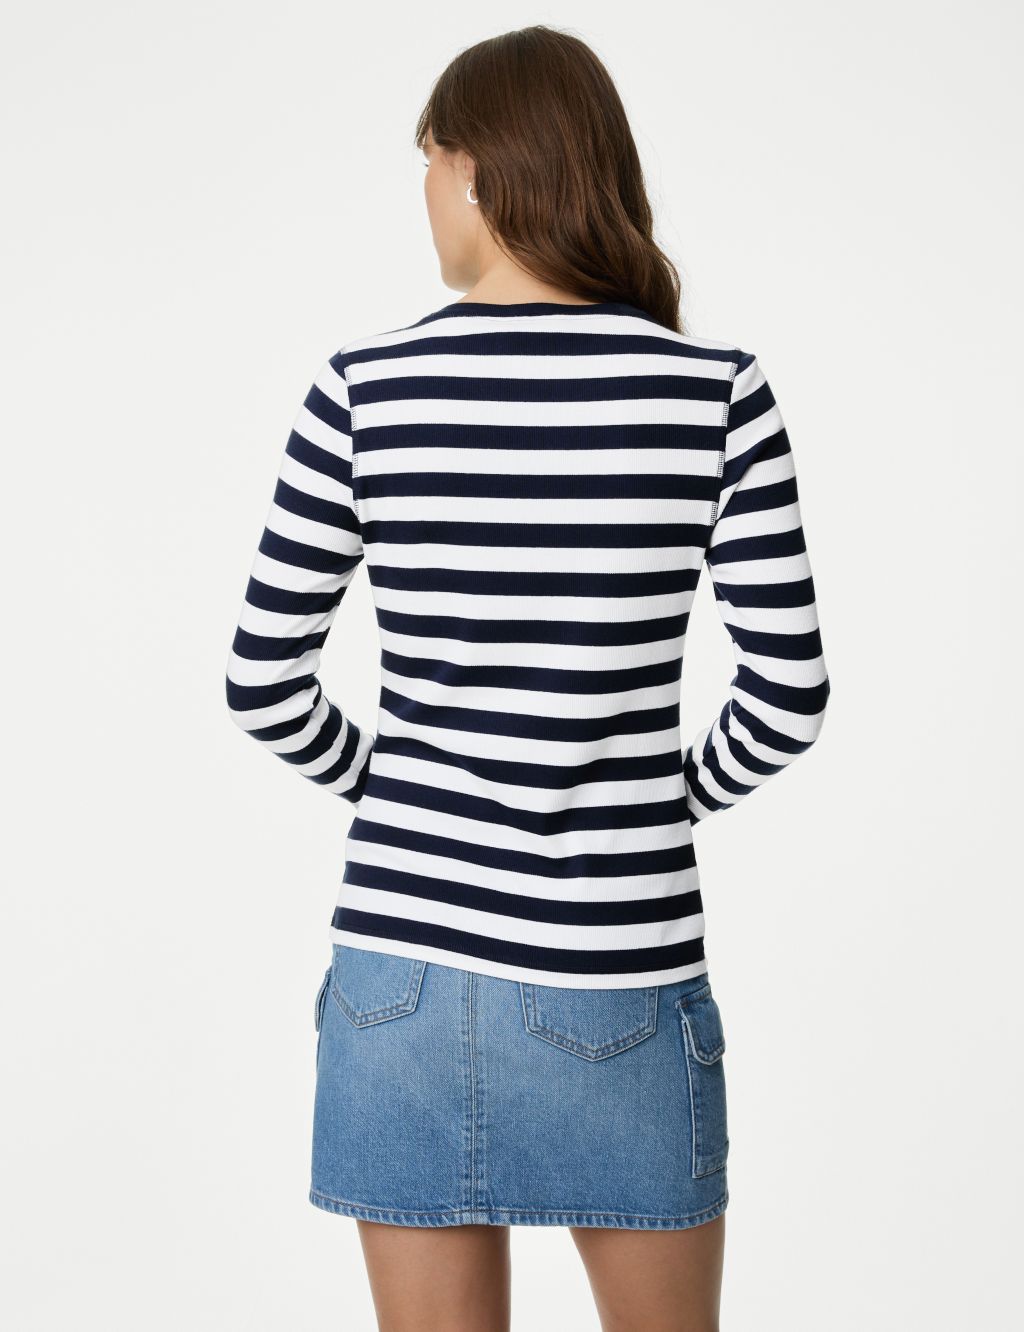 Cotton Rich Striped Ribbed Top image 5